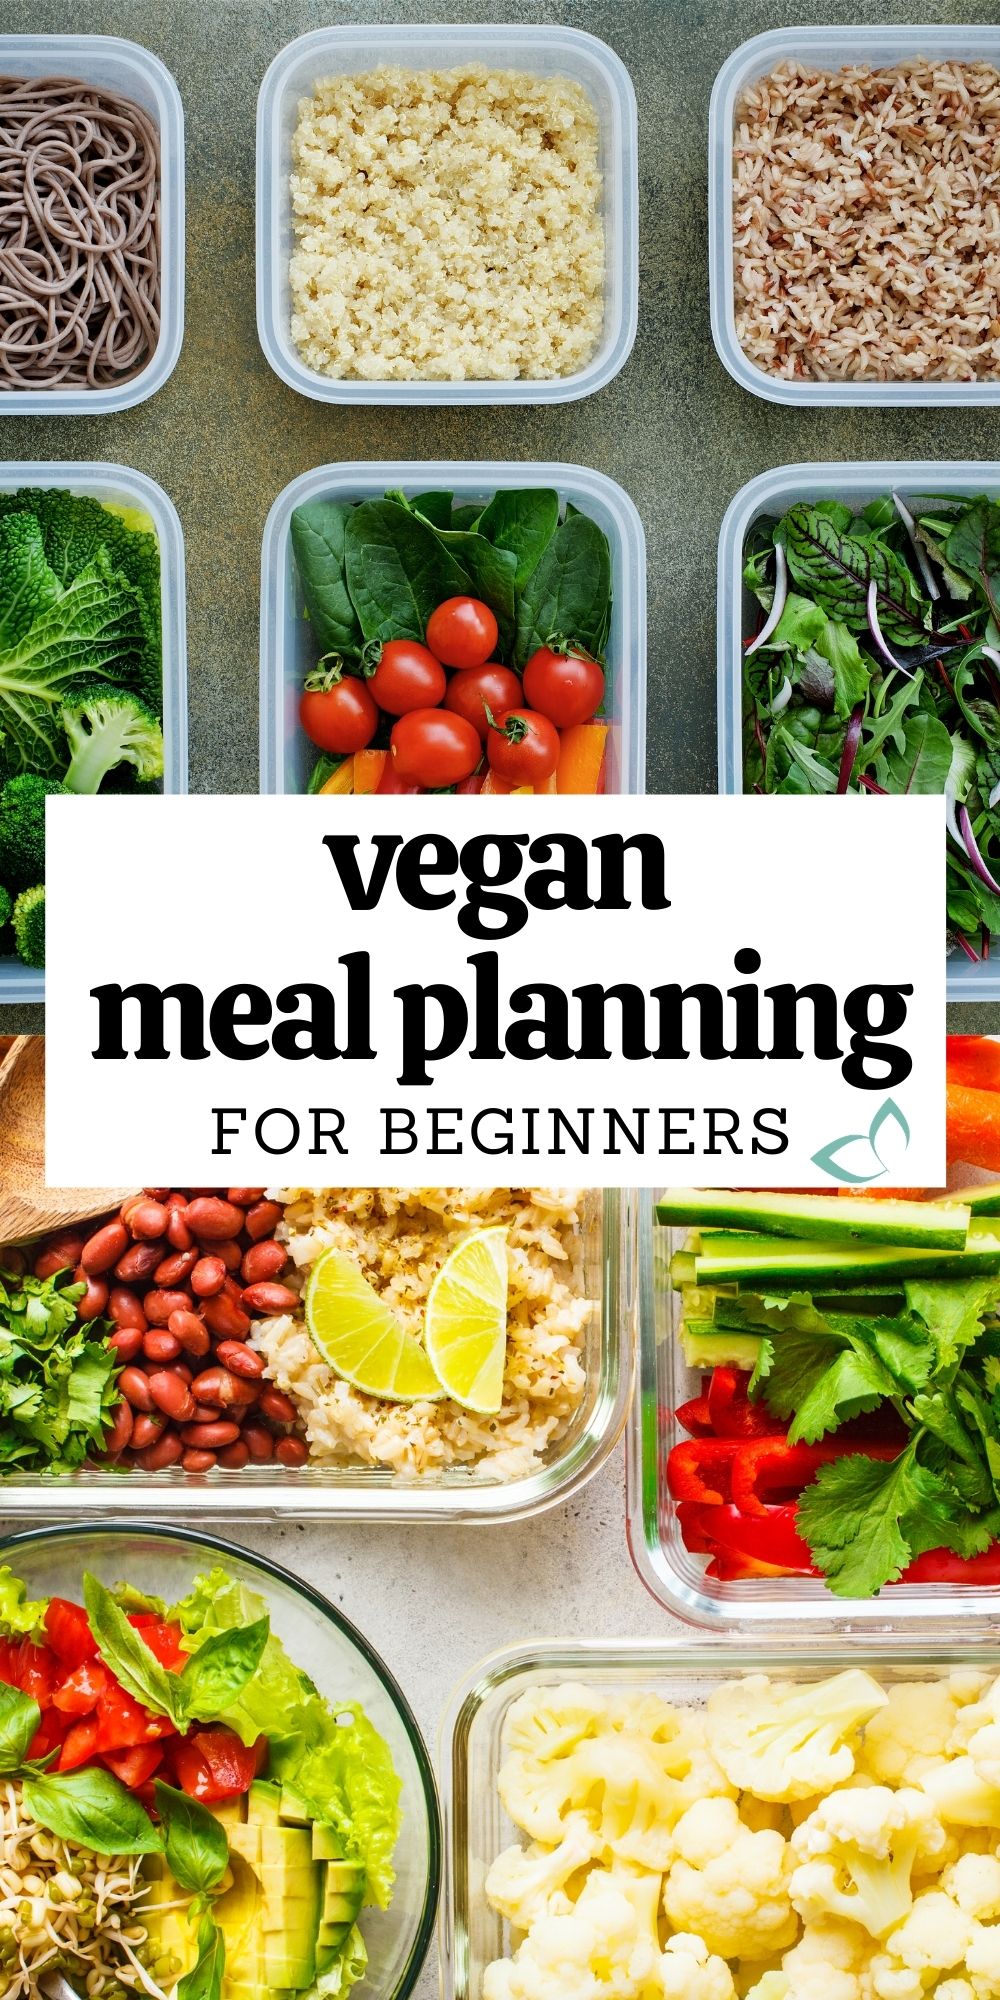 Vegan Meal Planning For Beginners - Health My Lifestyle